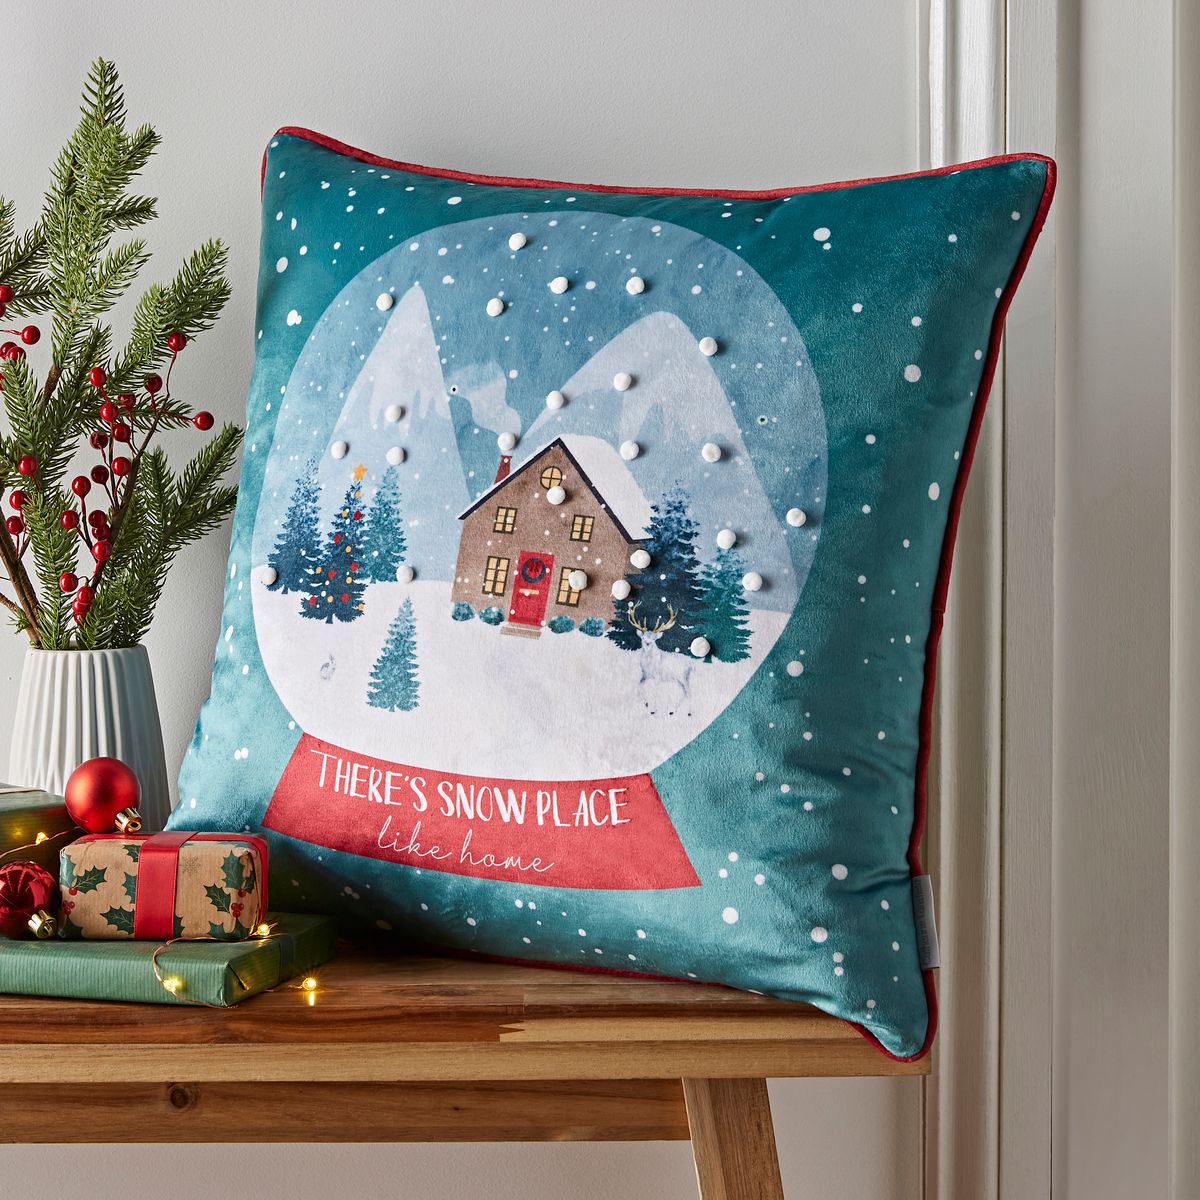 SNOW PLACE LIKE HOME CUSHION COVER 45X45CM